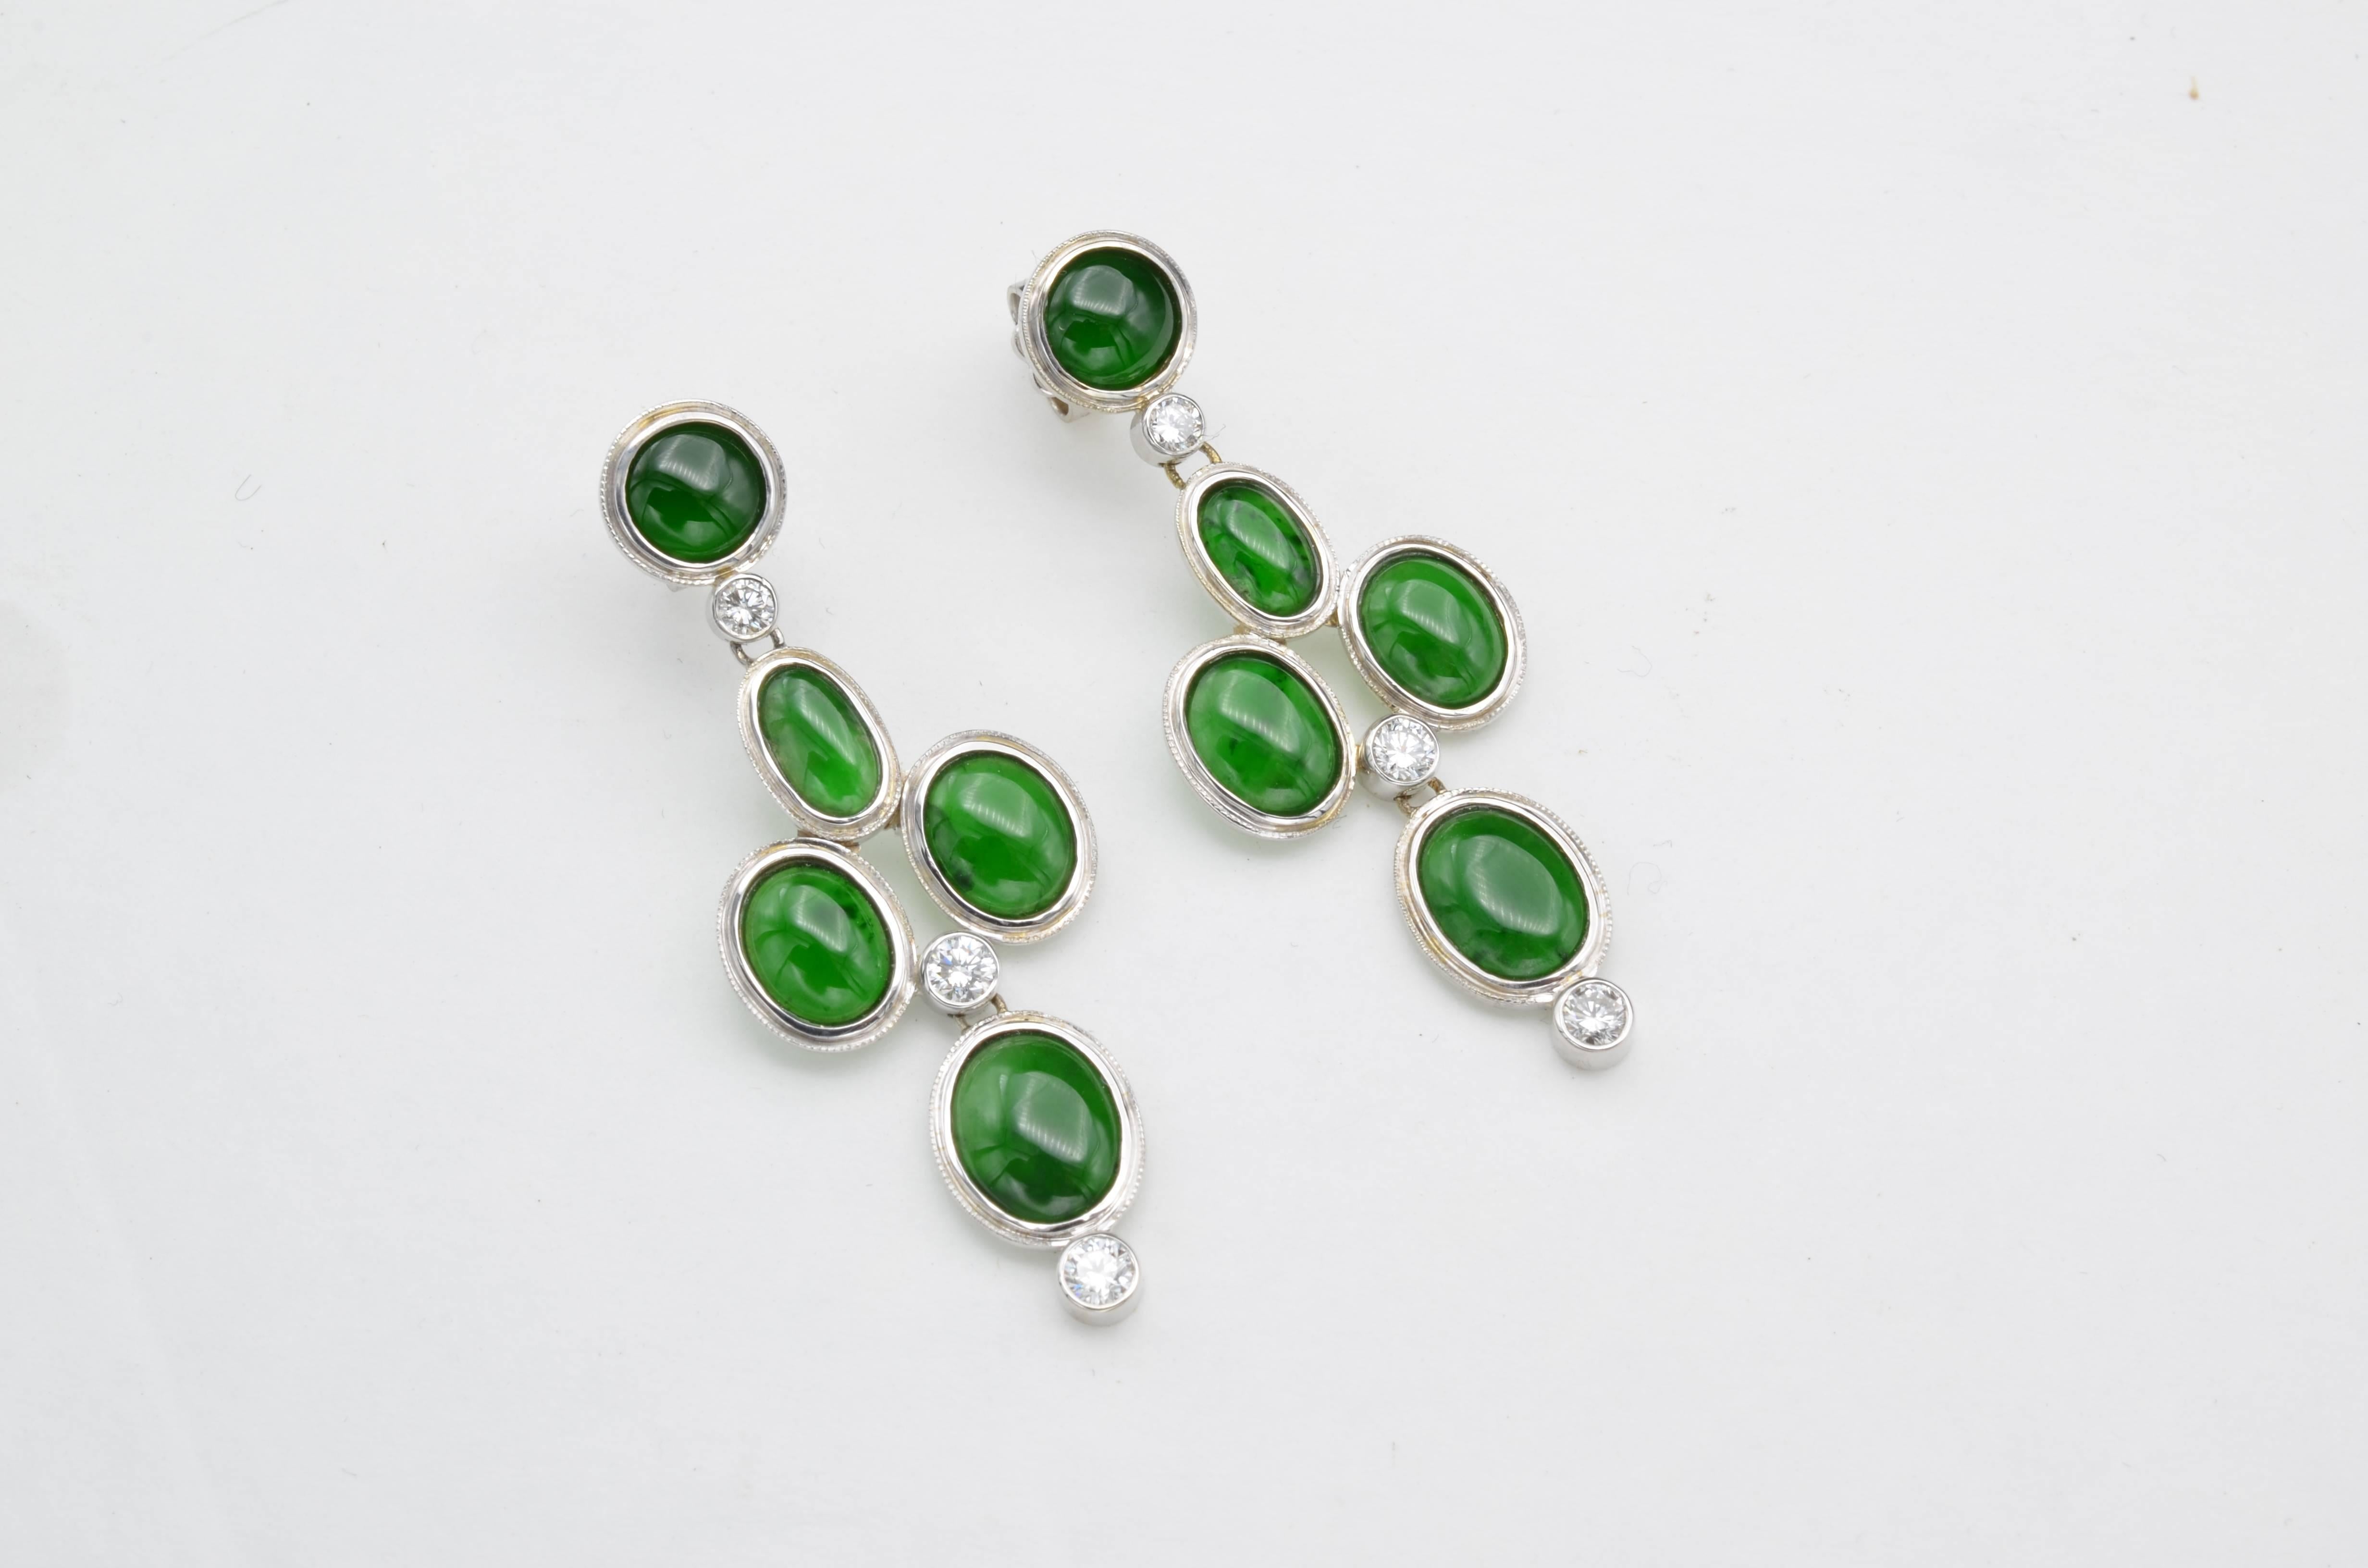 The high quality Jadeite equals 9.91 carats total weight and the round diamond total carat weight is 0.52 carats. Often revered above diamonds, these deep green jadeite earrings are especially sought after in China. The rounds and ovals create a